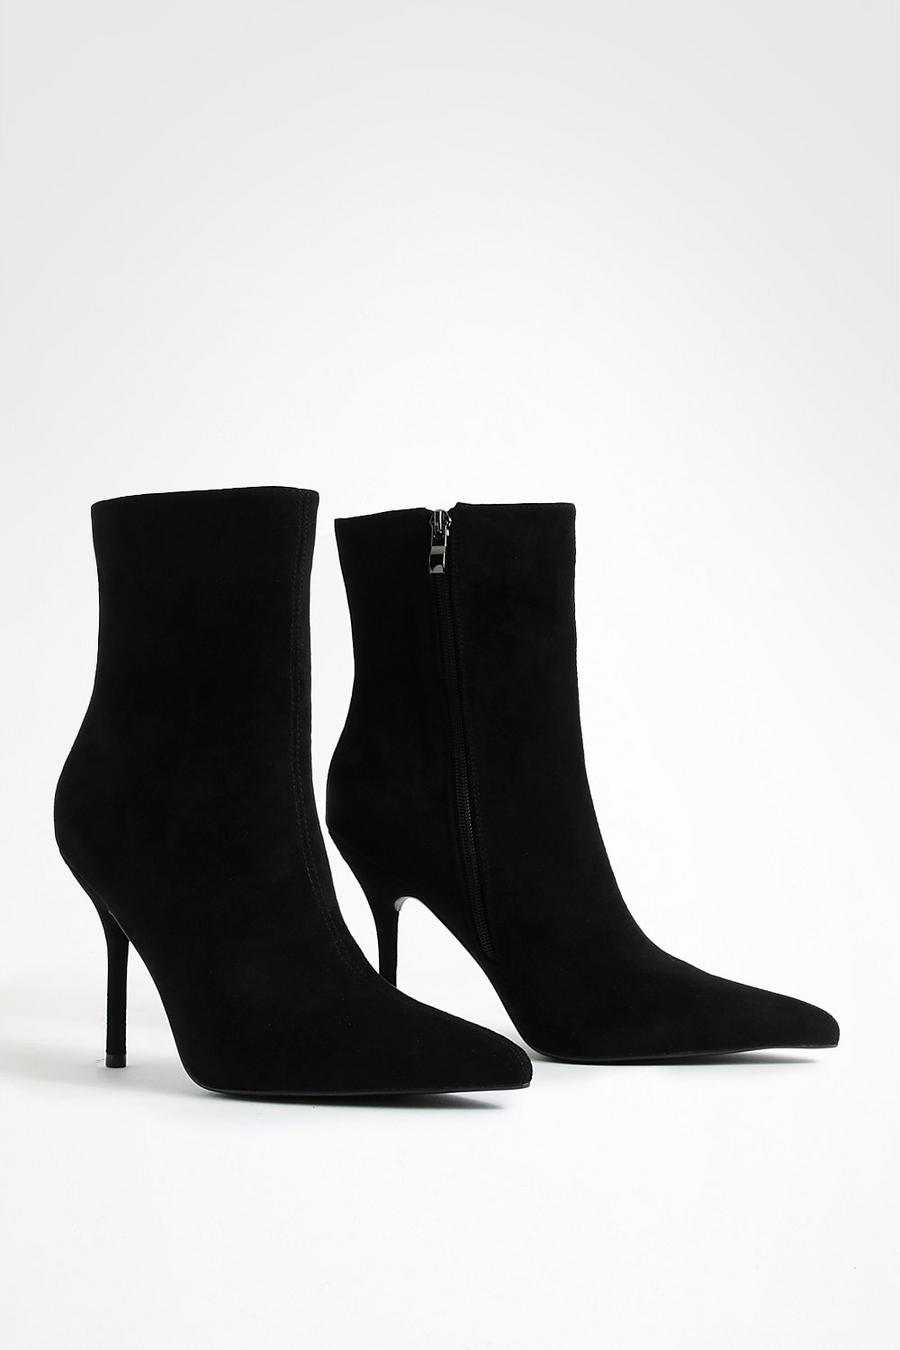 Black Faux Suede Stiletto Pointed Ankle Boots